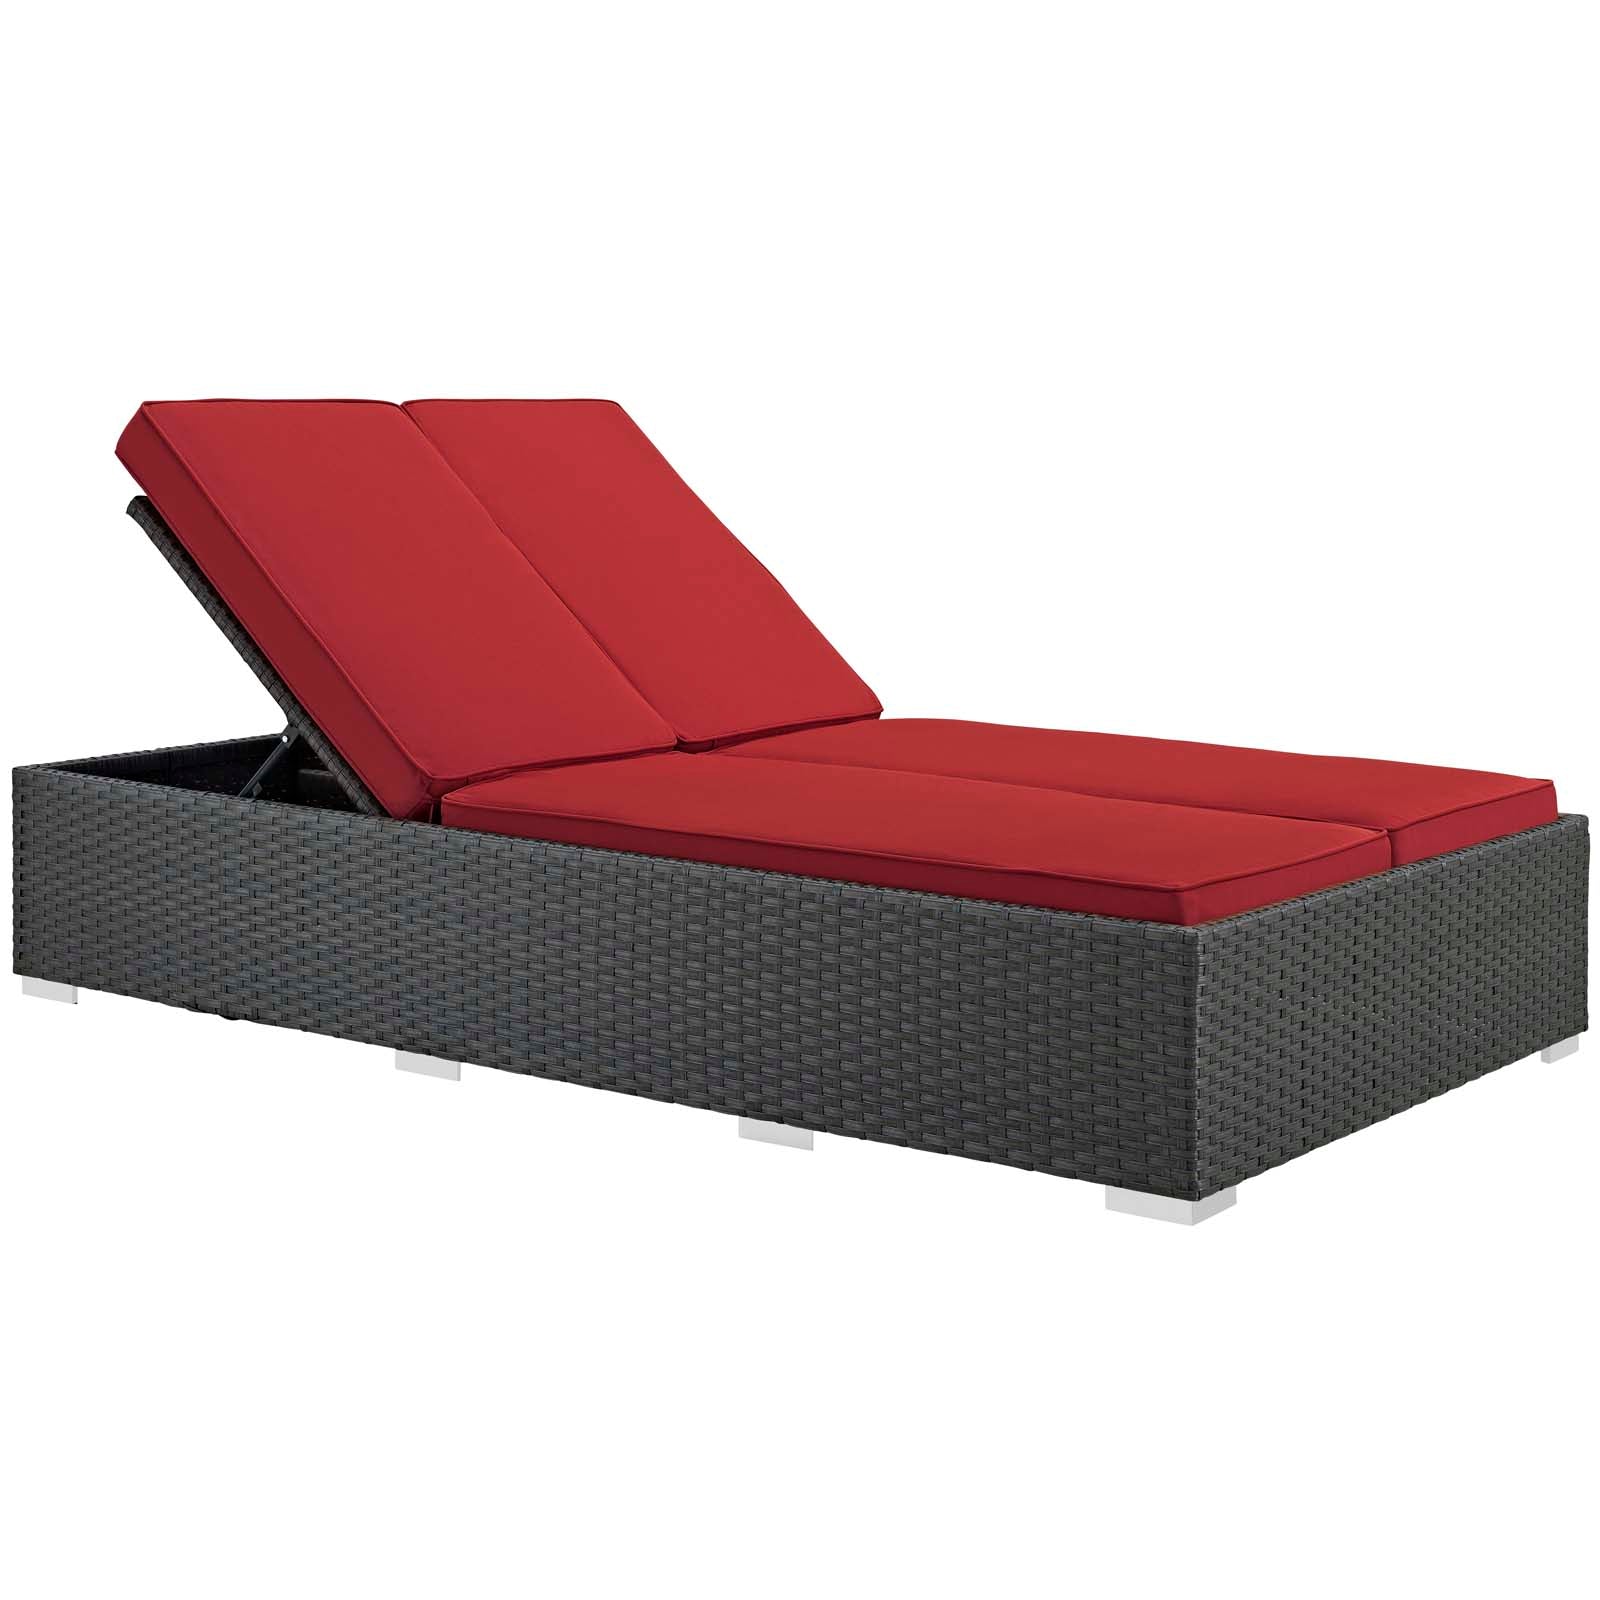 Sojourn Outdoor Patio Sunbrella Double Chaise Chocolate Red